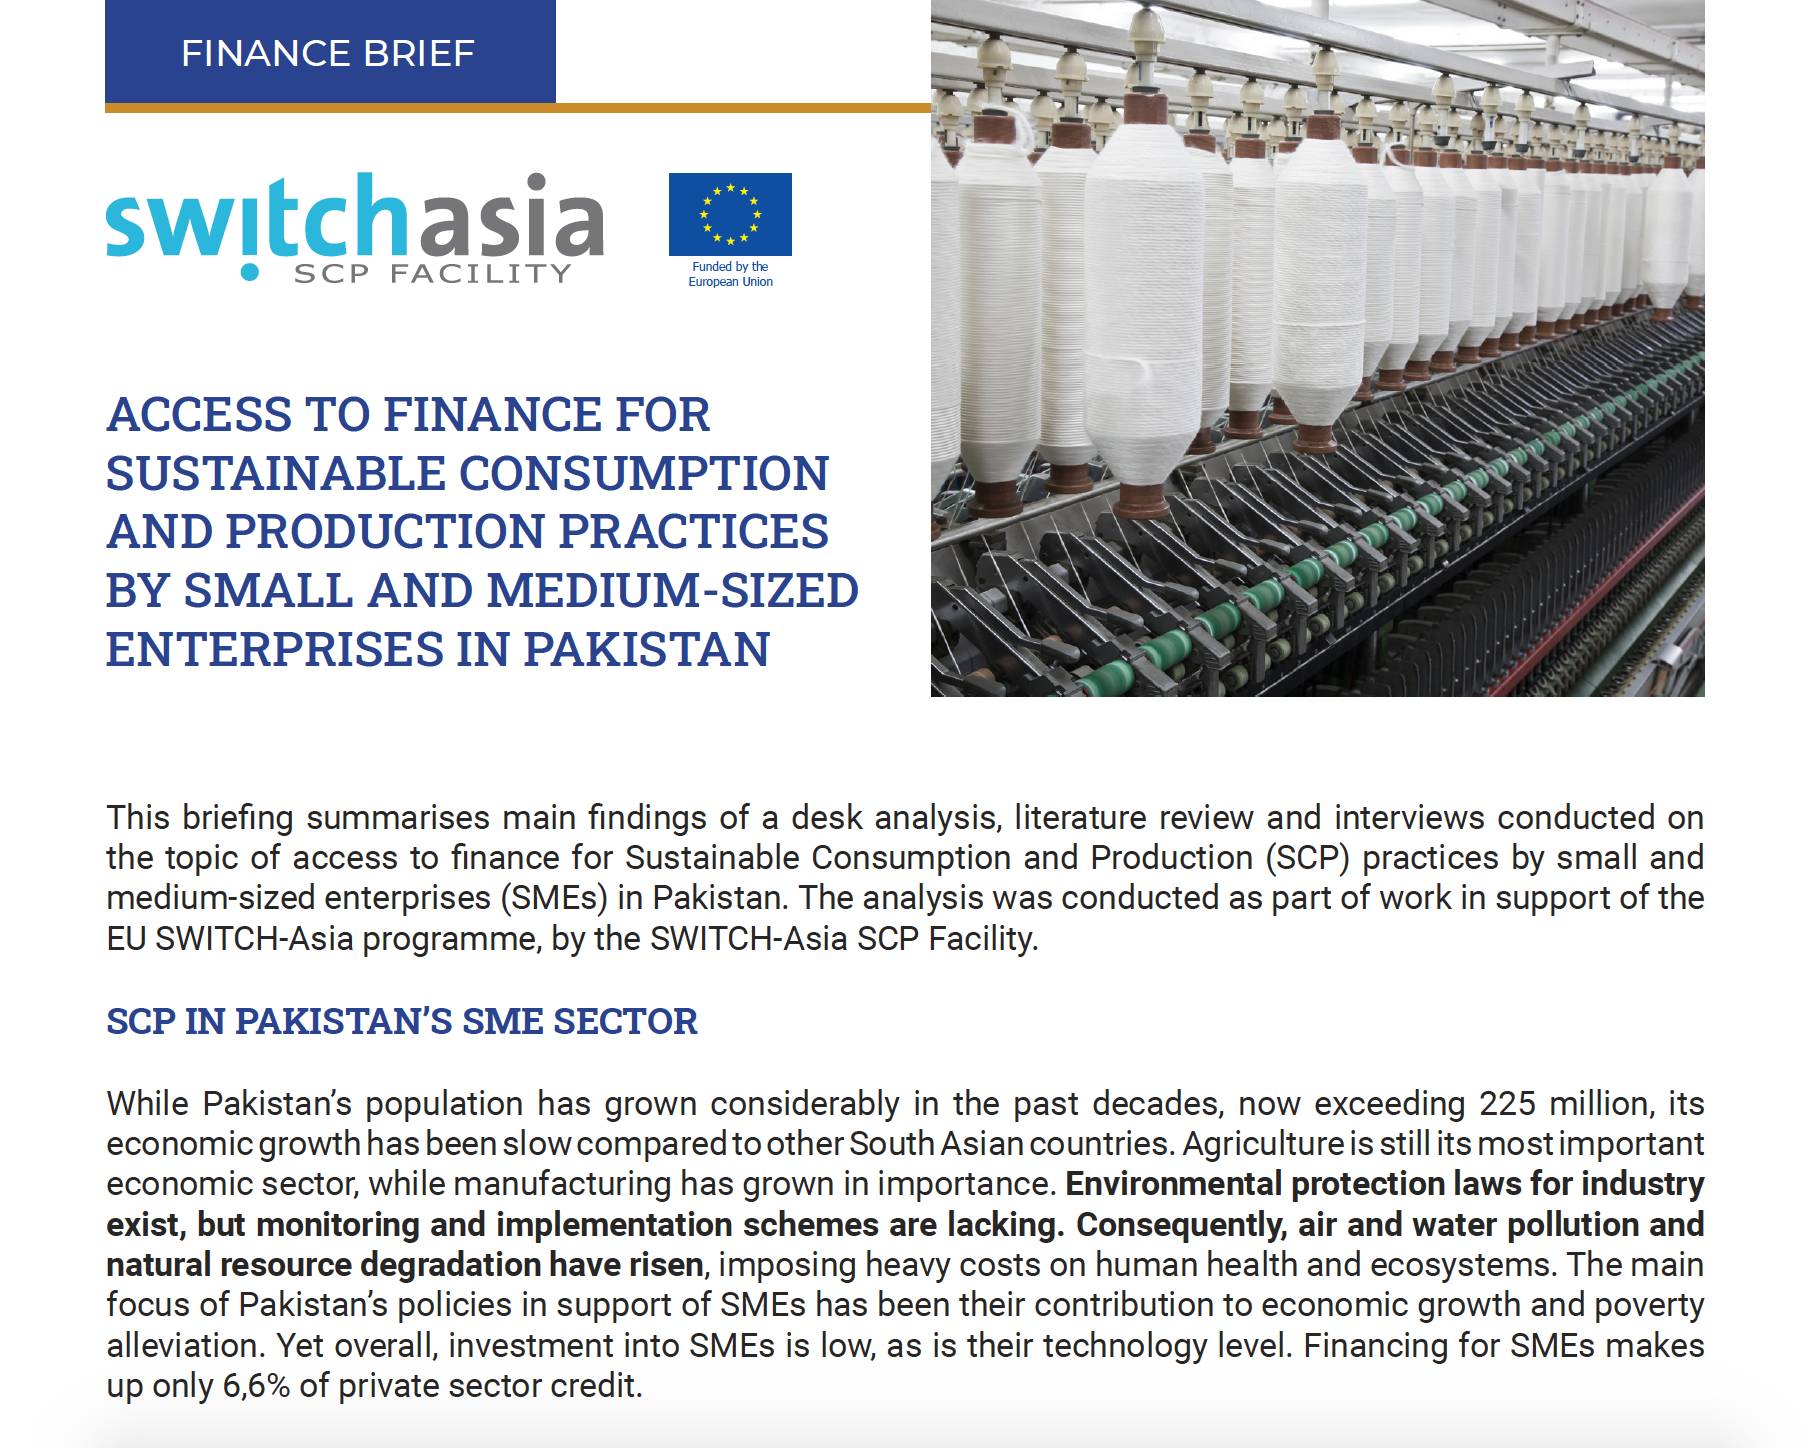 Access to Finance for SCP Practices by Small and Medium-sized Enterprises in Pakistan3197